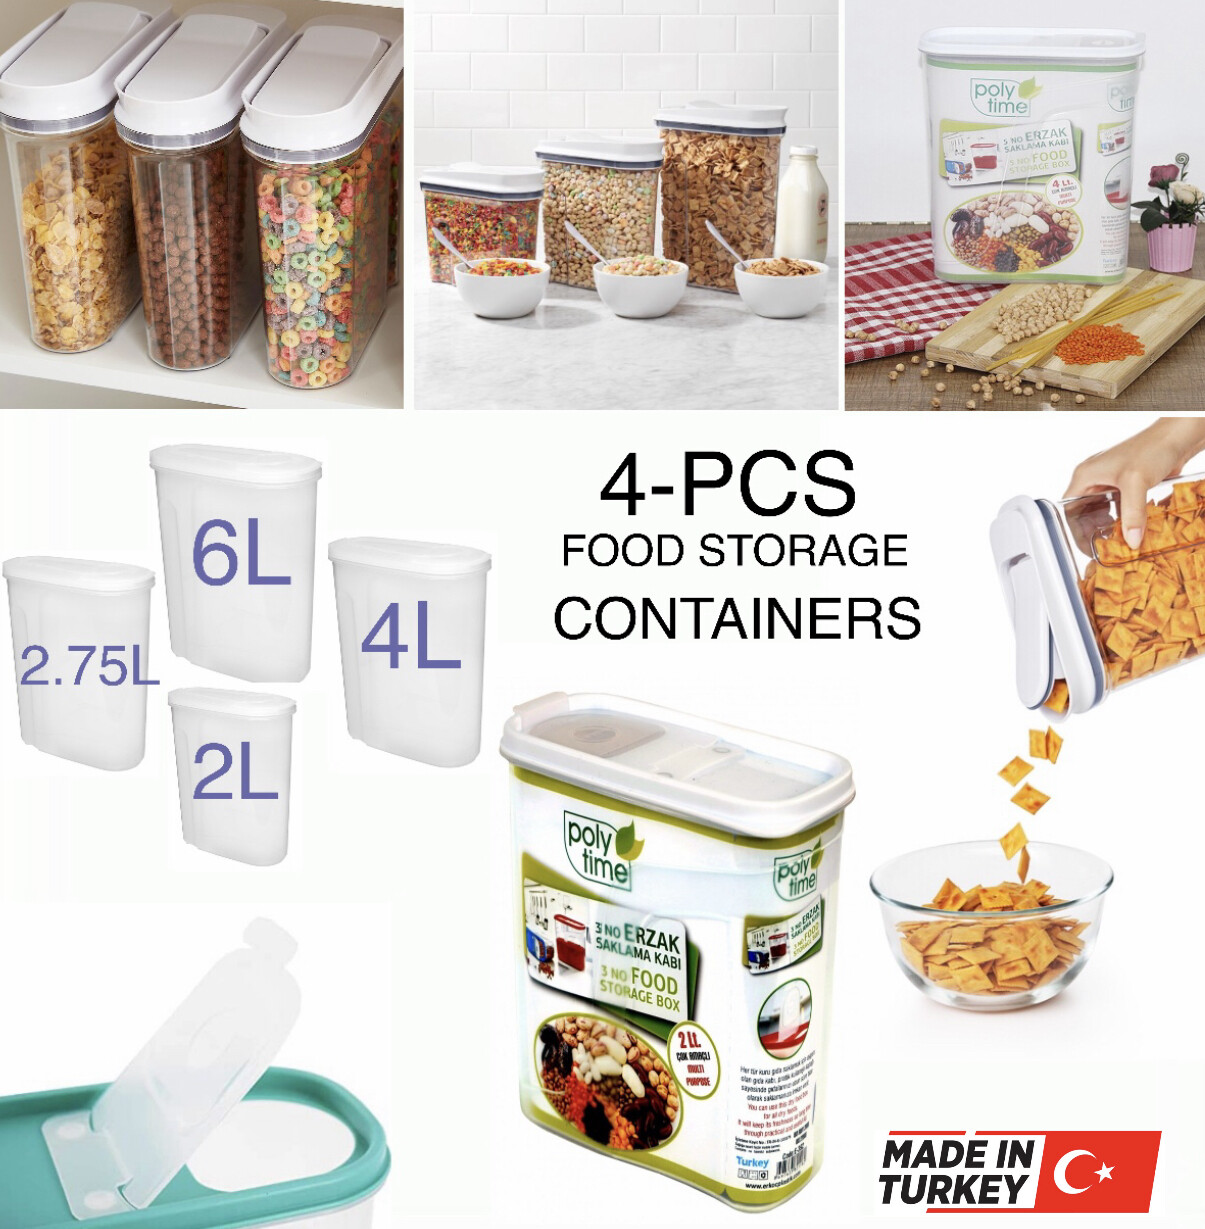 4-Pcs Food Containers